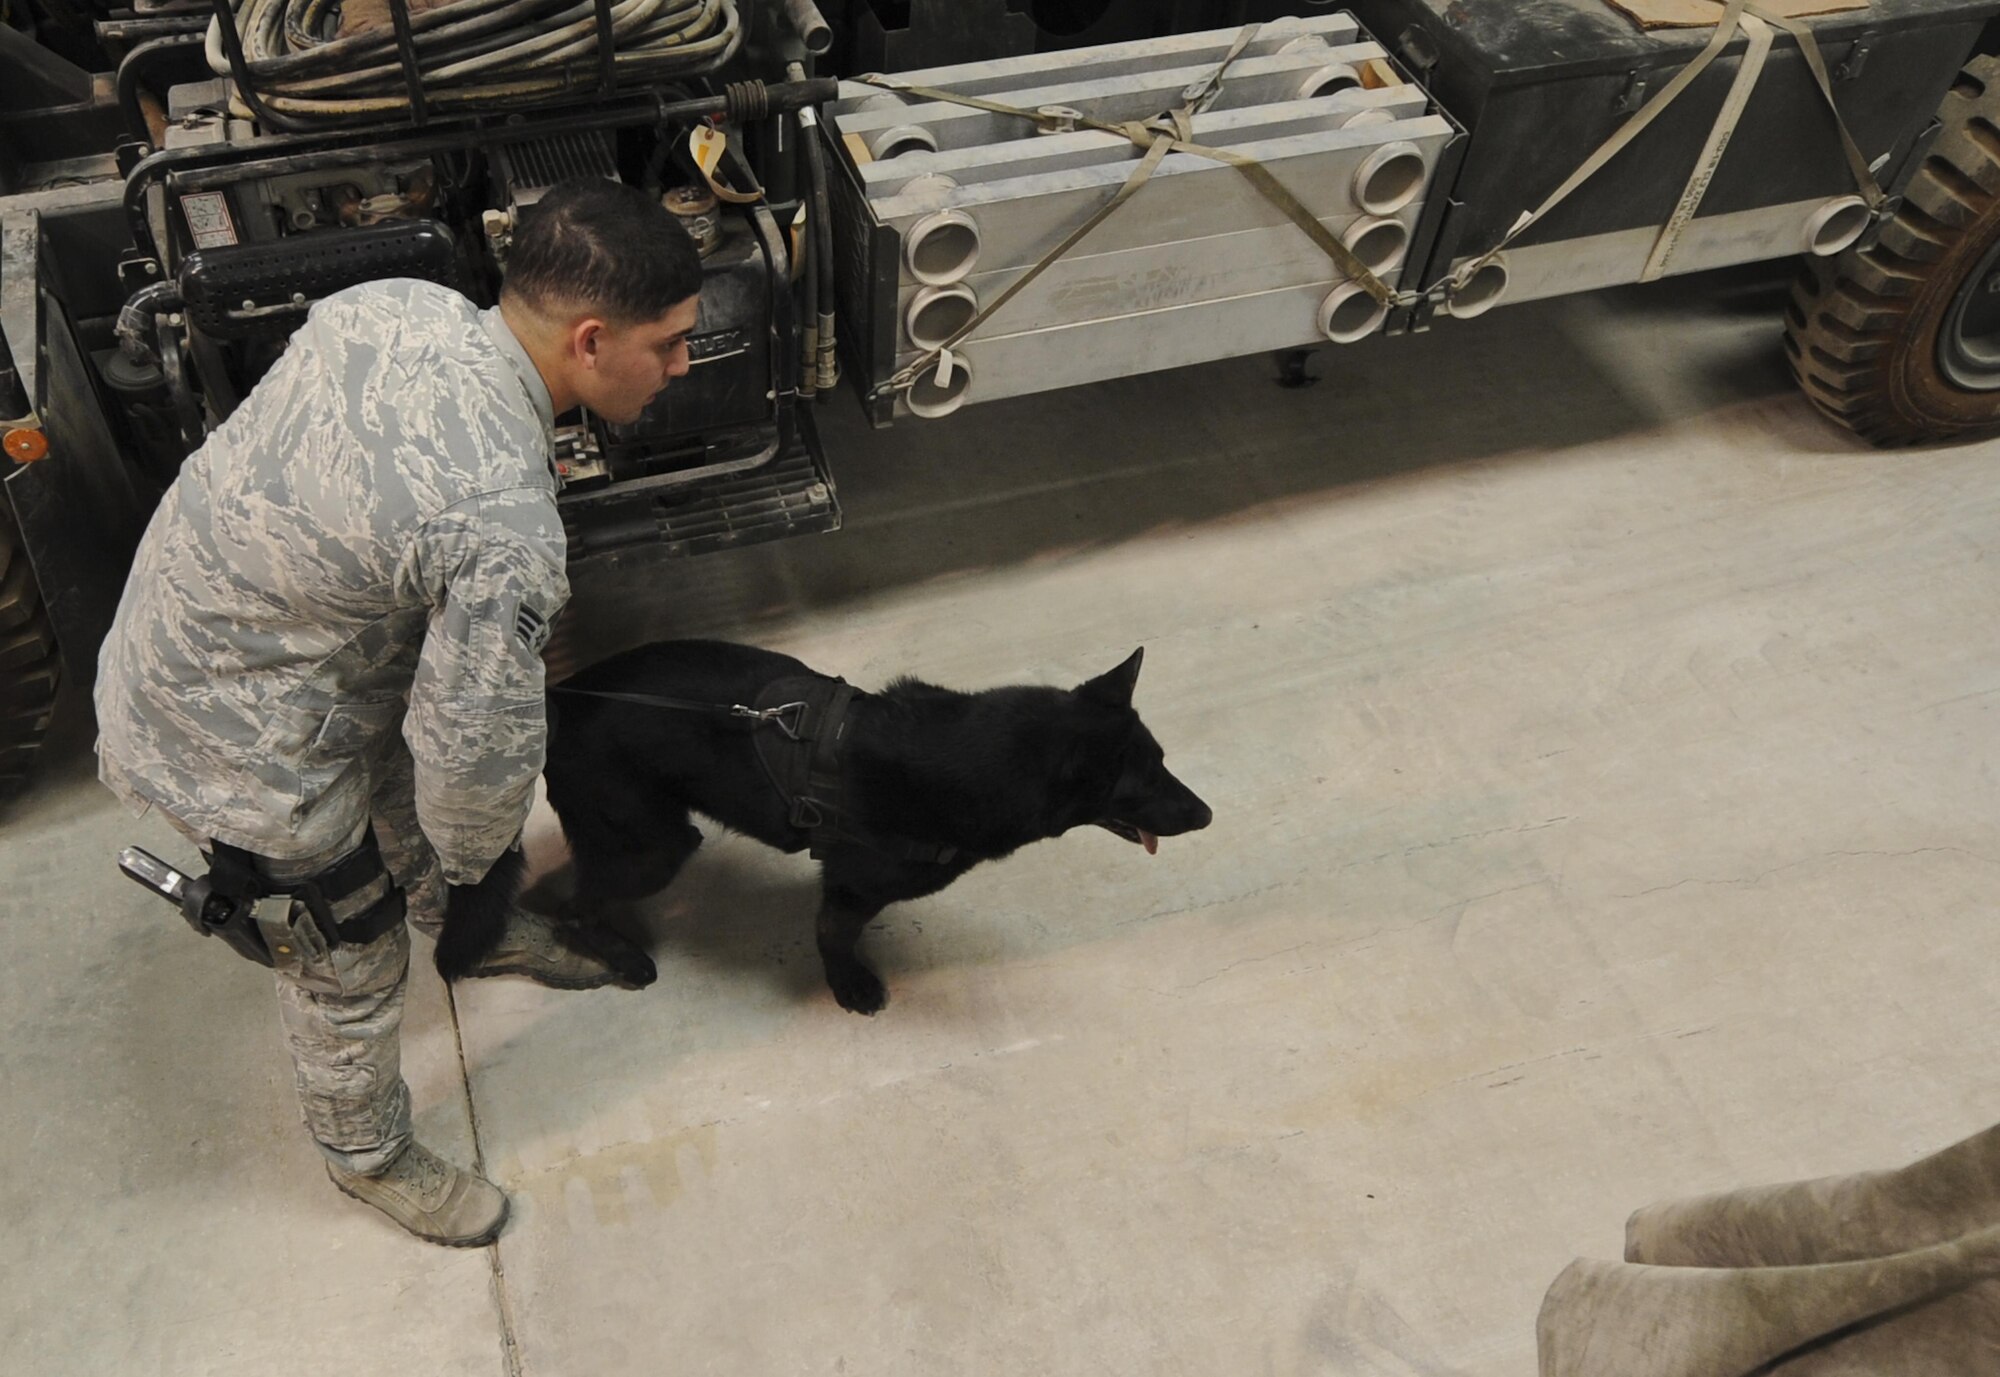 Senior Airman Daniel Alvarez, 380th Expeditionary Security Forces Squadron military working dog handler, and his MWD, Lola, search for explosives or narcotics in a warehouse at an undisclosed location in Southwest Asia Aug. 8, 2013. The training was designed to test the MWD’s senses for detecting explosives or narcotics in different quantities. Alvarez and Lola are deployed from Moody Air Force Base, Ga., and Alvarez calls Northridge, Calif., home.